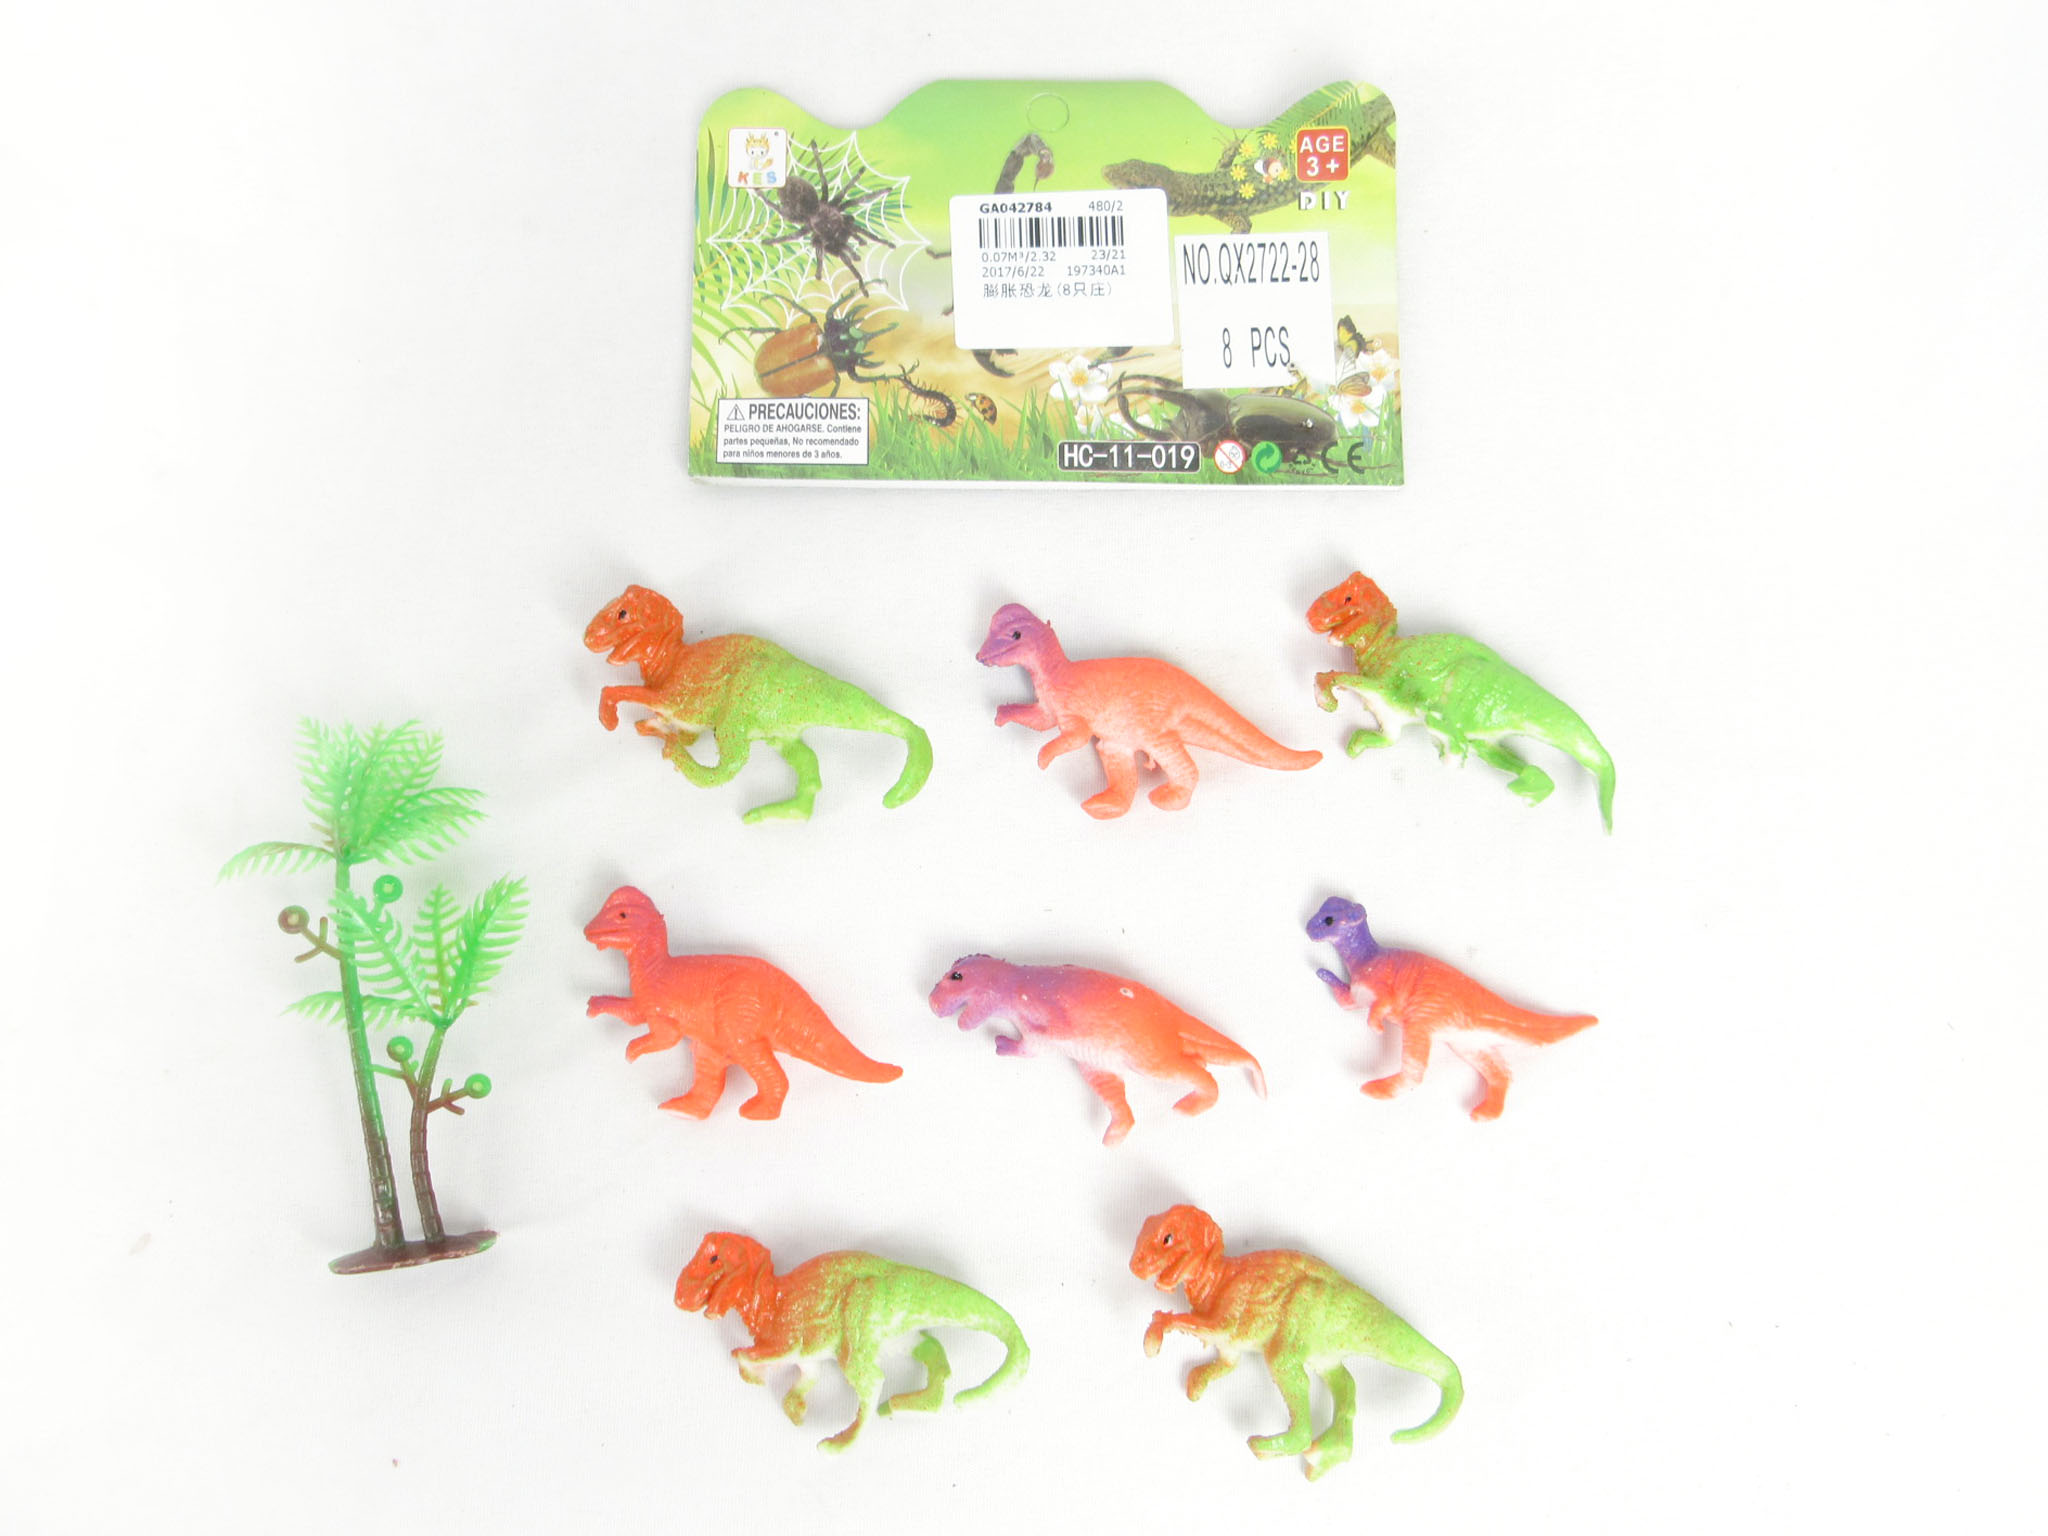 Swell Dinosaur(8in1) toys